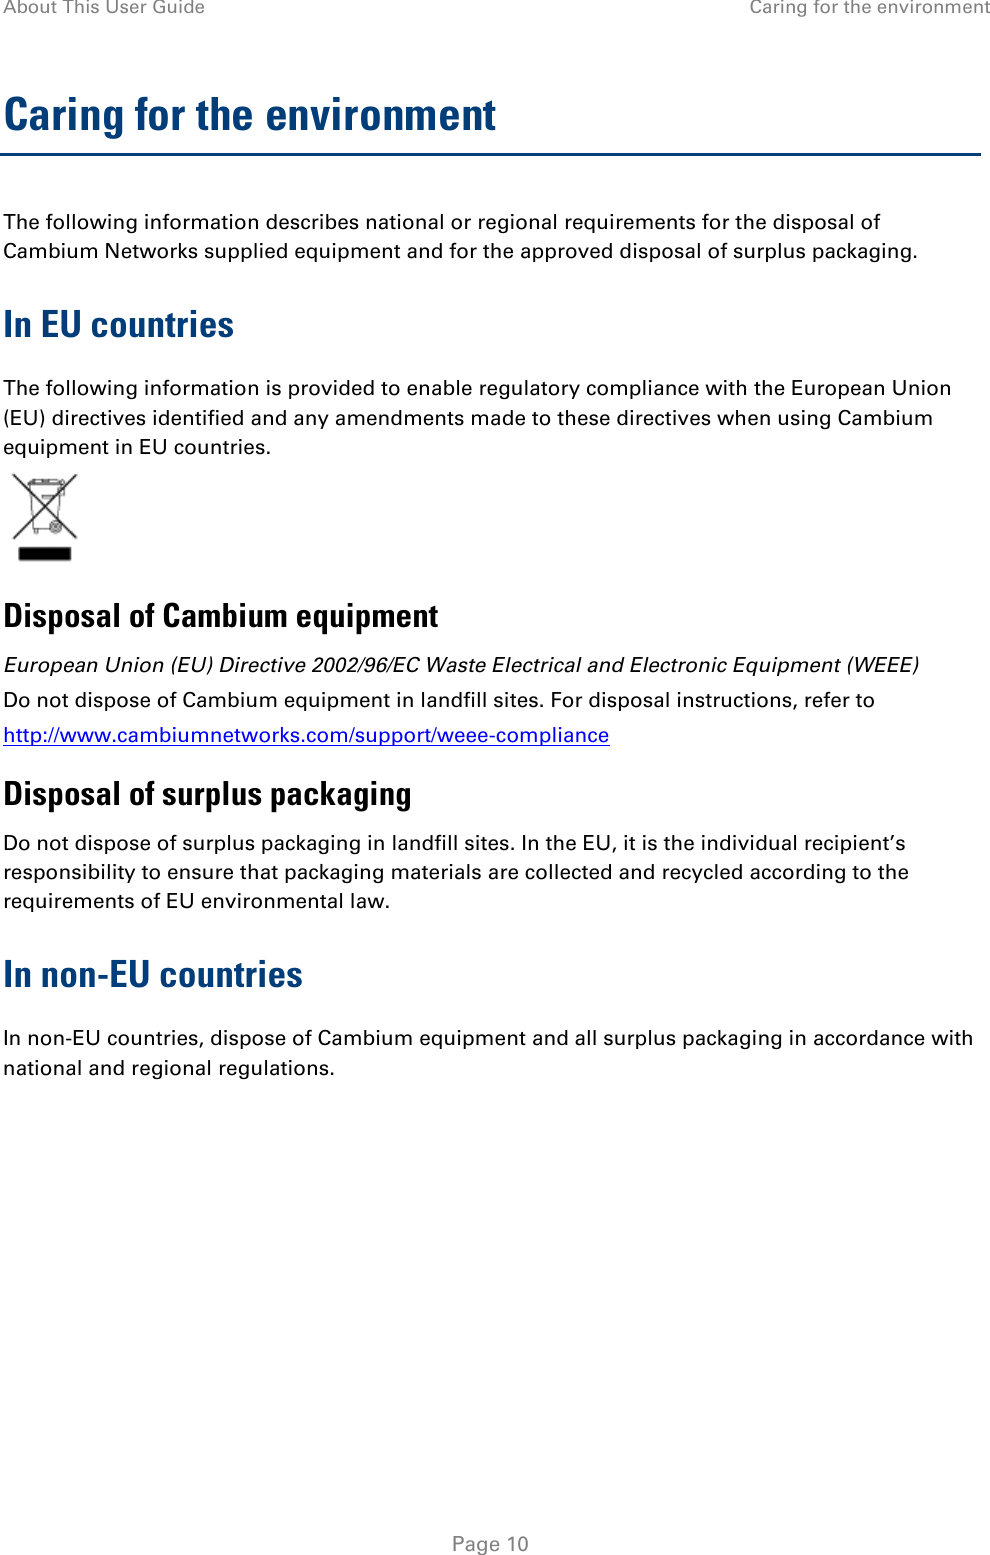 About This User Guide Caring for the environment  Caring for the environment The following information describes national or regional requirements for the disposal of Cambium Networks supplied equipment and for the approved disposal of surplus packaging. In EU countries The following information is provided to enable regulatory compliance with the European Union (EU) directives identified and any amendments made to these directives when using Cambium equipment in EU countries.  Disposal of Cambium equipment European Union (EU) Directive 2002/96/EC Waste Electrical and Electronic Equipment (WEEE) Do not dispose of Cambium equipment in landfill sites. For disposal instructions, refer to  http://www.cambiumnetworks.com/support/weee-compliance Disposal of surplus packaging Do not dispose of surplus packaging in landfill sites. In the EU, it is the individual recipient’s responsibility to ensure that packaging materials are collected and recycled according to the requirements of EU environmental law. In non-EU countries In non-EU countries, dispose of Cambium equipment and all surplus packaging in accordance with national and regional regulations.    Page 10 